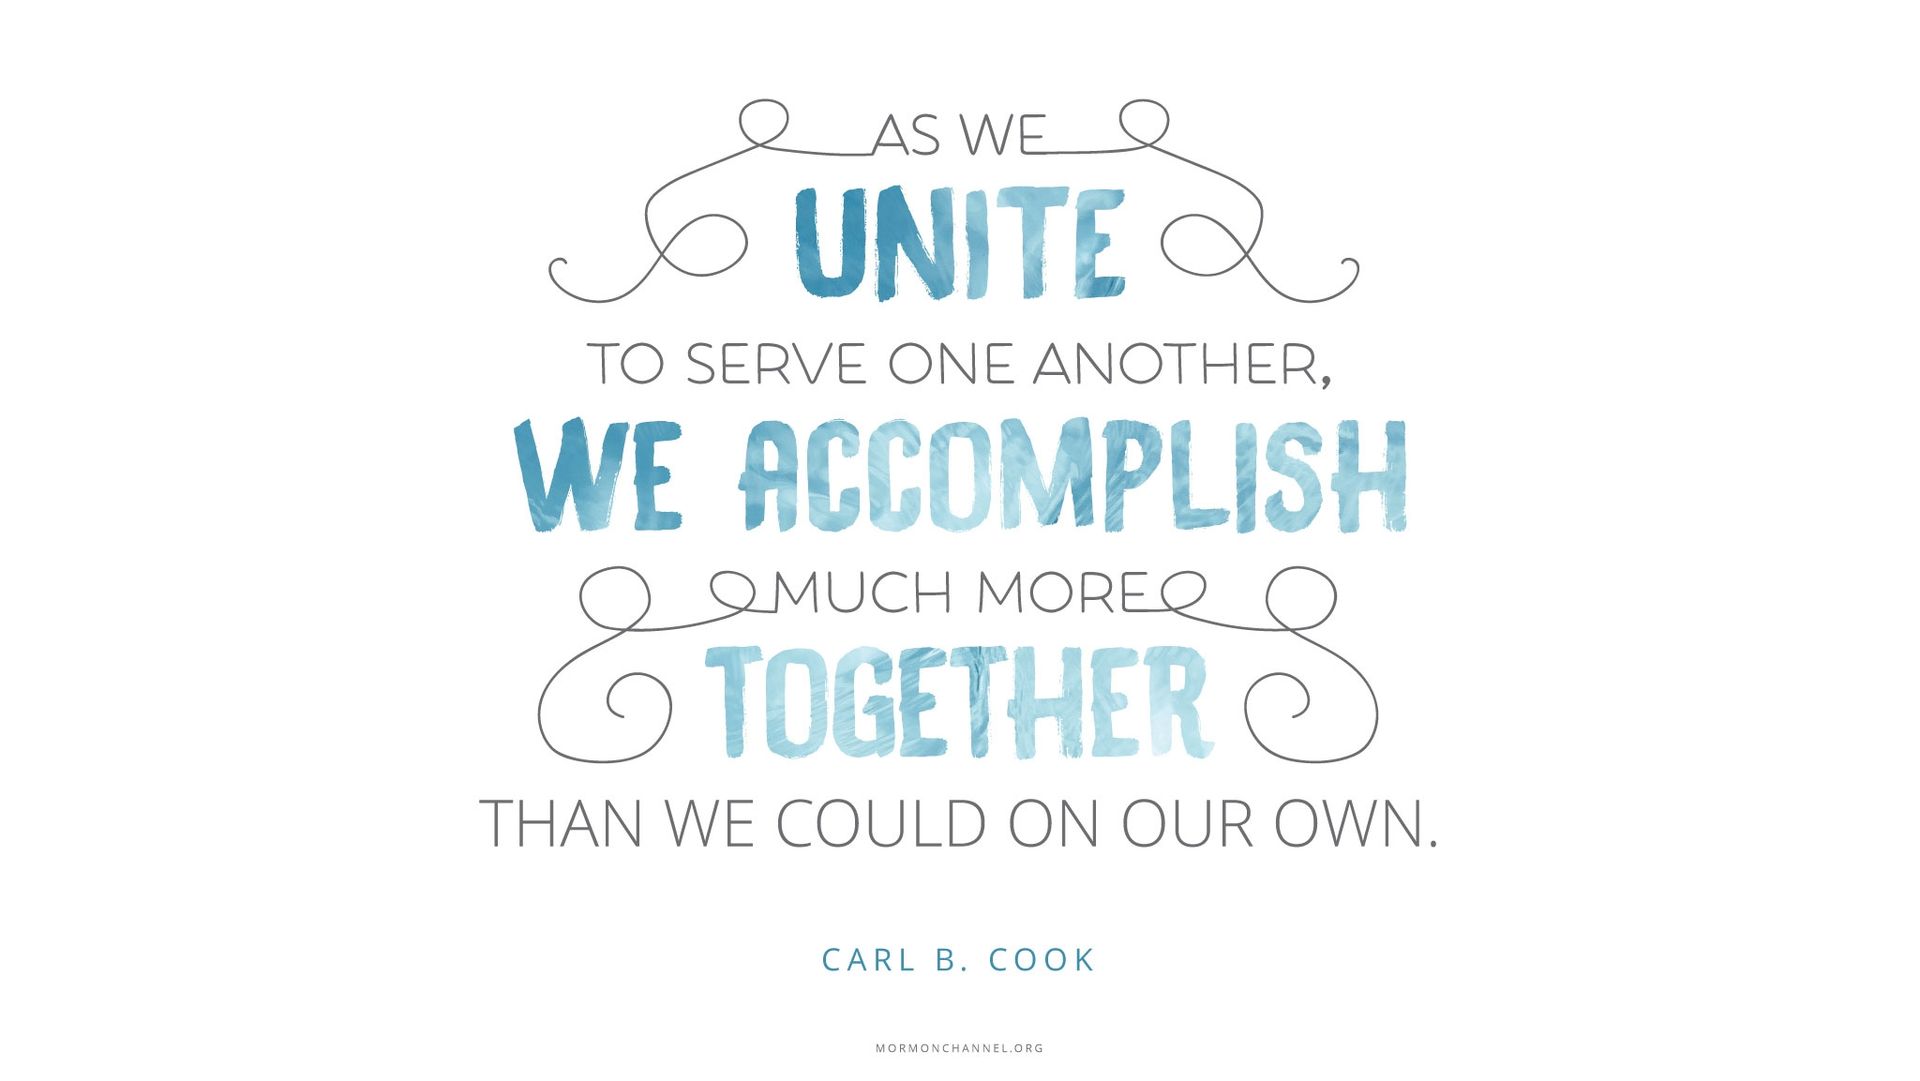 “As we unite to serve one another, we accomplish much more together than we could on our own.”—Elder Carl B. Cook, “Serve” © undefined ipCode 1.